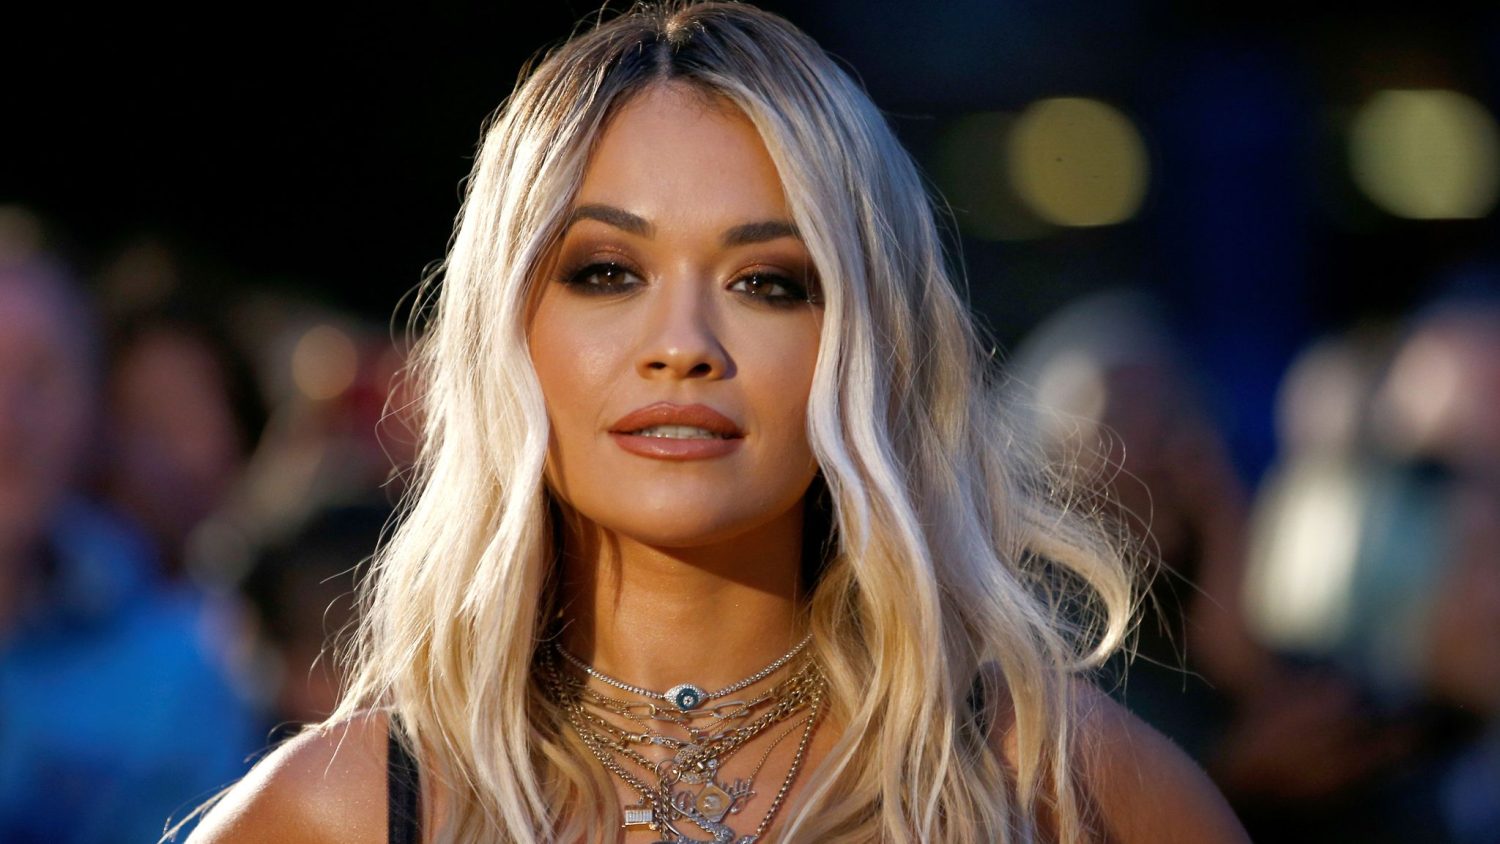 Rita Ora's Confessions - Raunchy Desires, Threesome Fun And Adult Toys